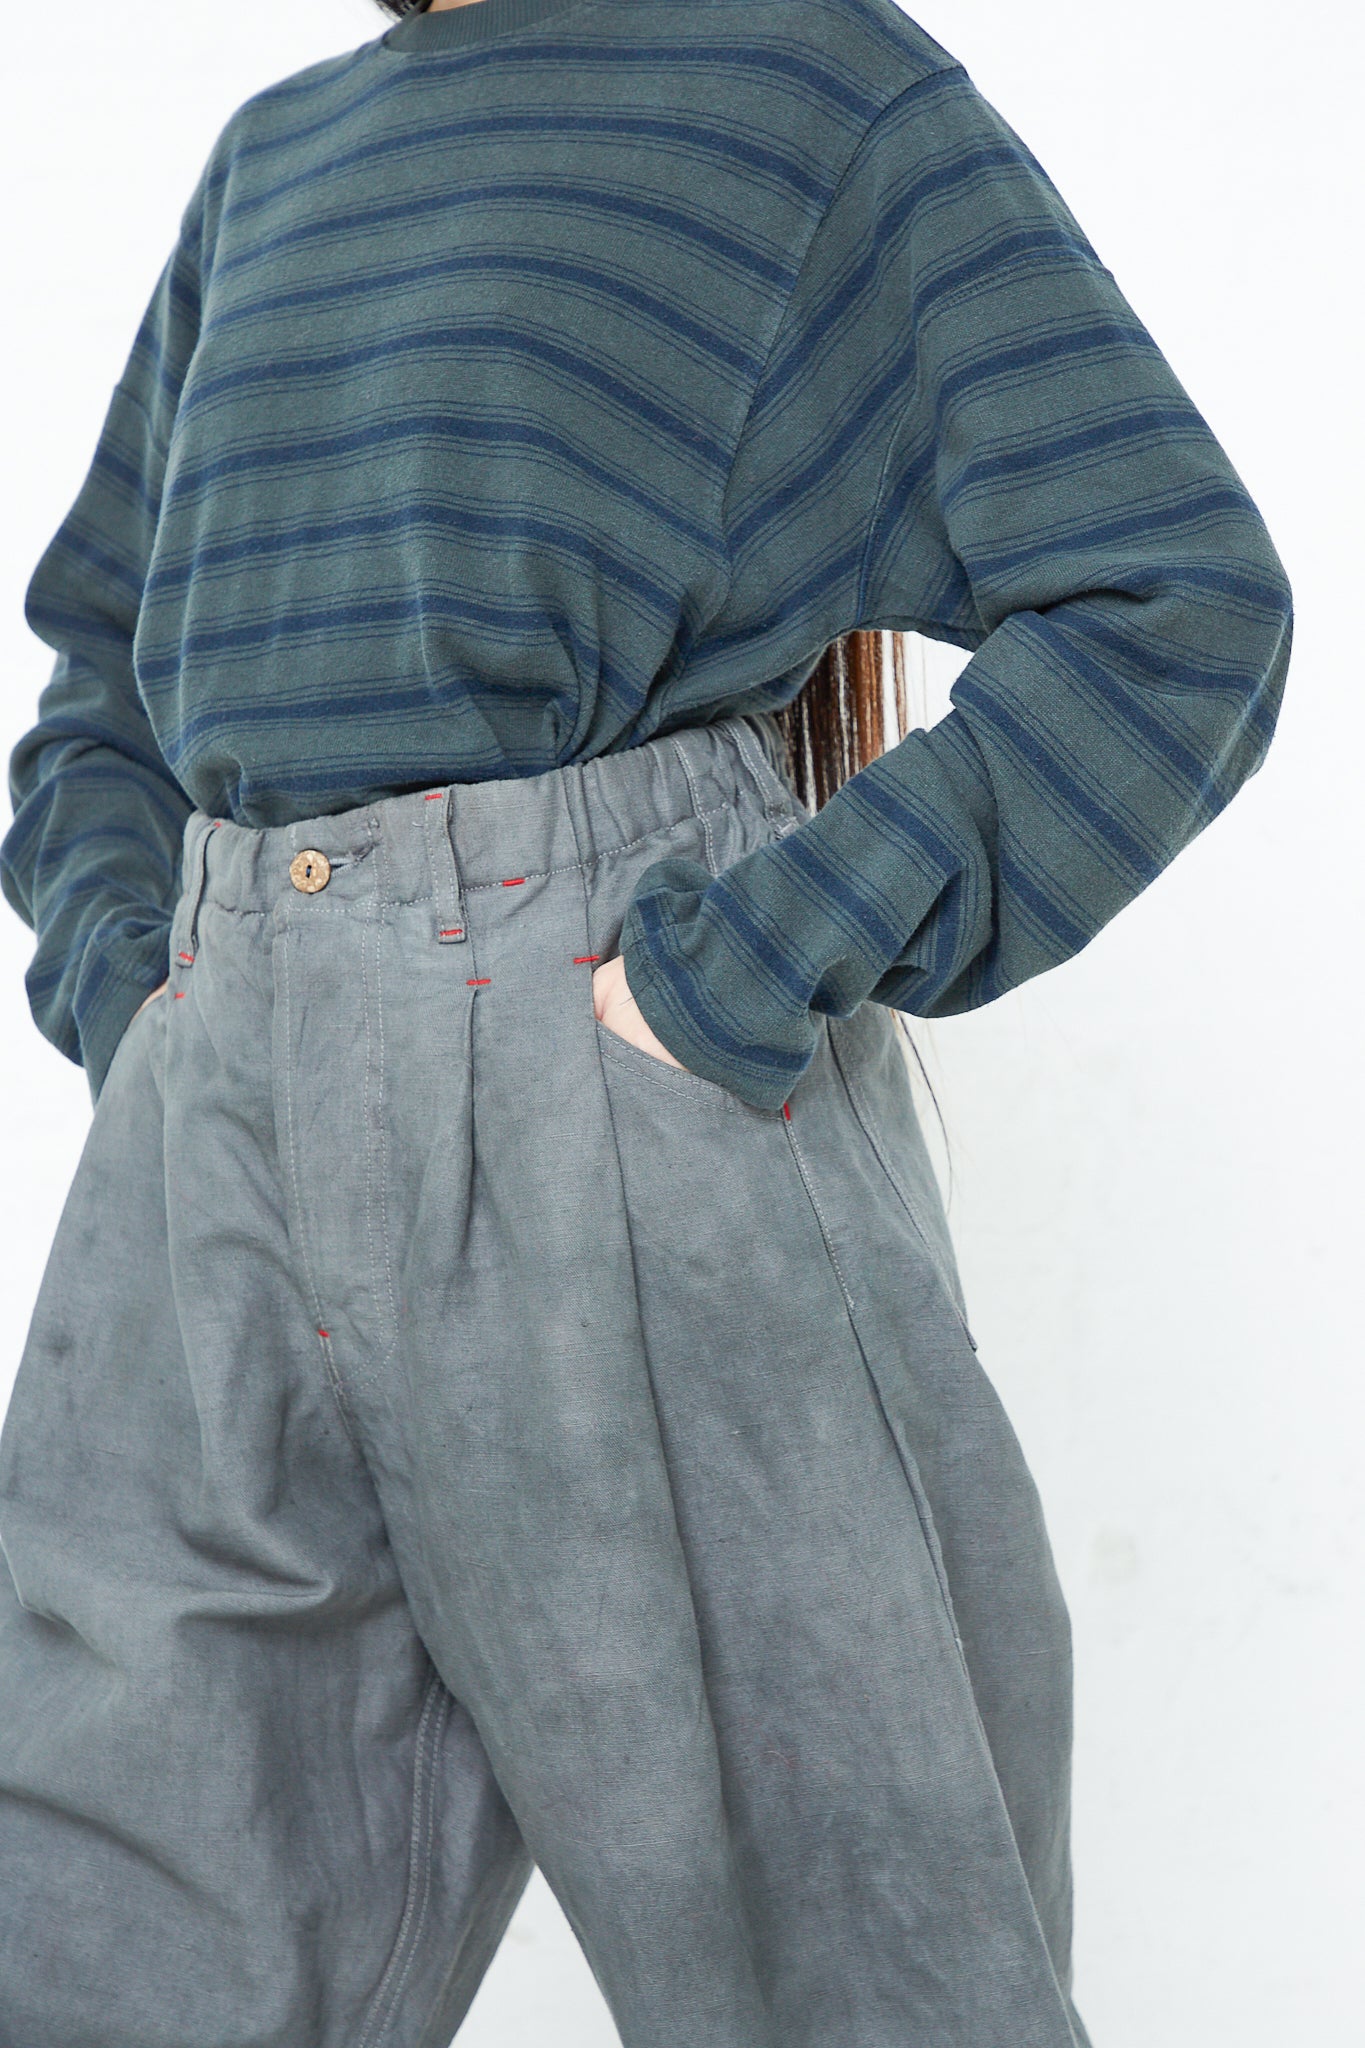 A woman wearing the Dr. Collectors P40 Z Boys Military Pant in Swiss Army, a 9 oz. Cotton and Hemp pant with a relaxed fit, pleats, and an elasticated waistband.